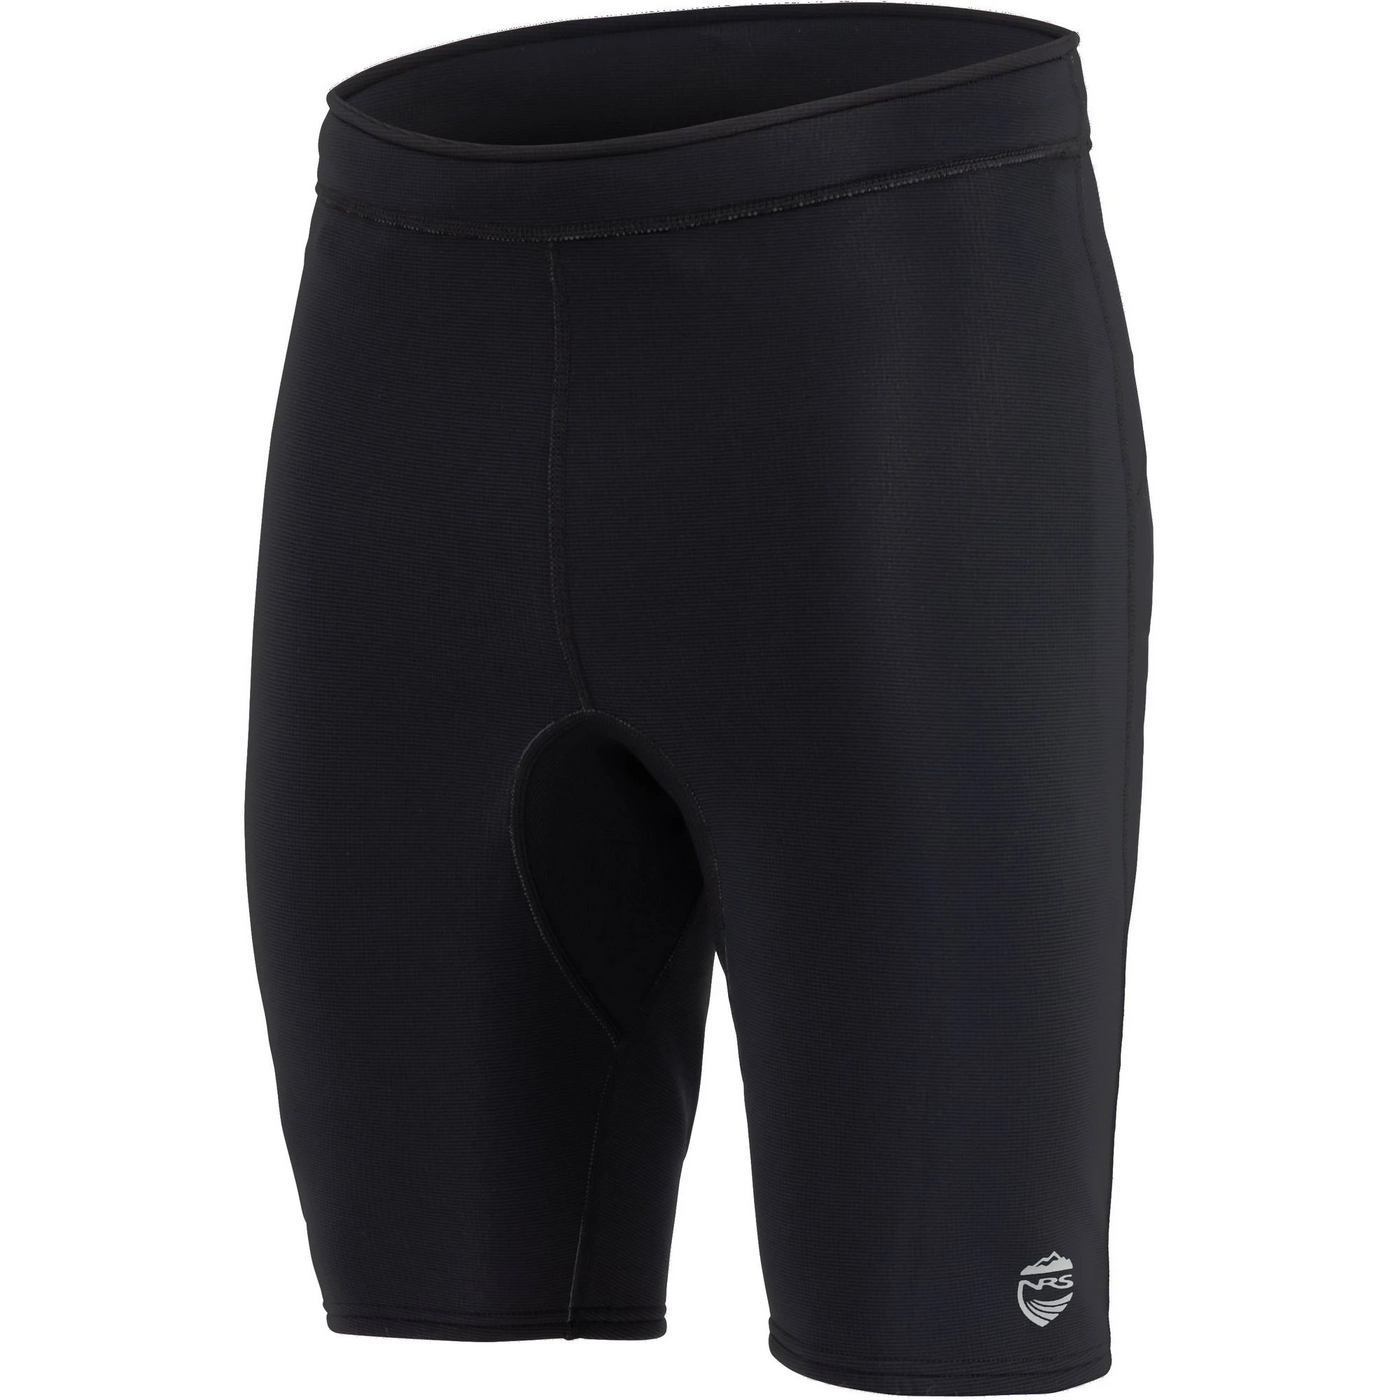 NRS Mens HydroSkin 0.5 Short (clearance)